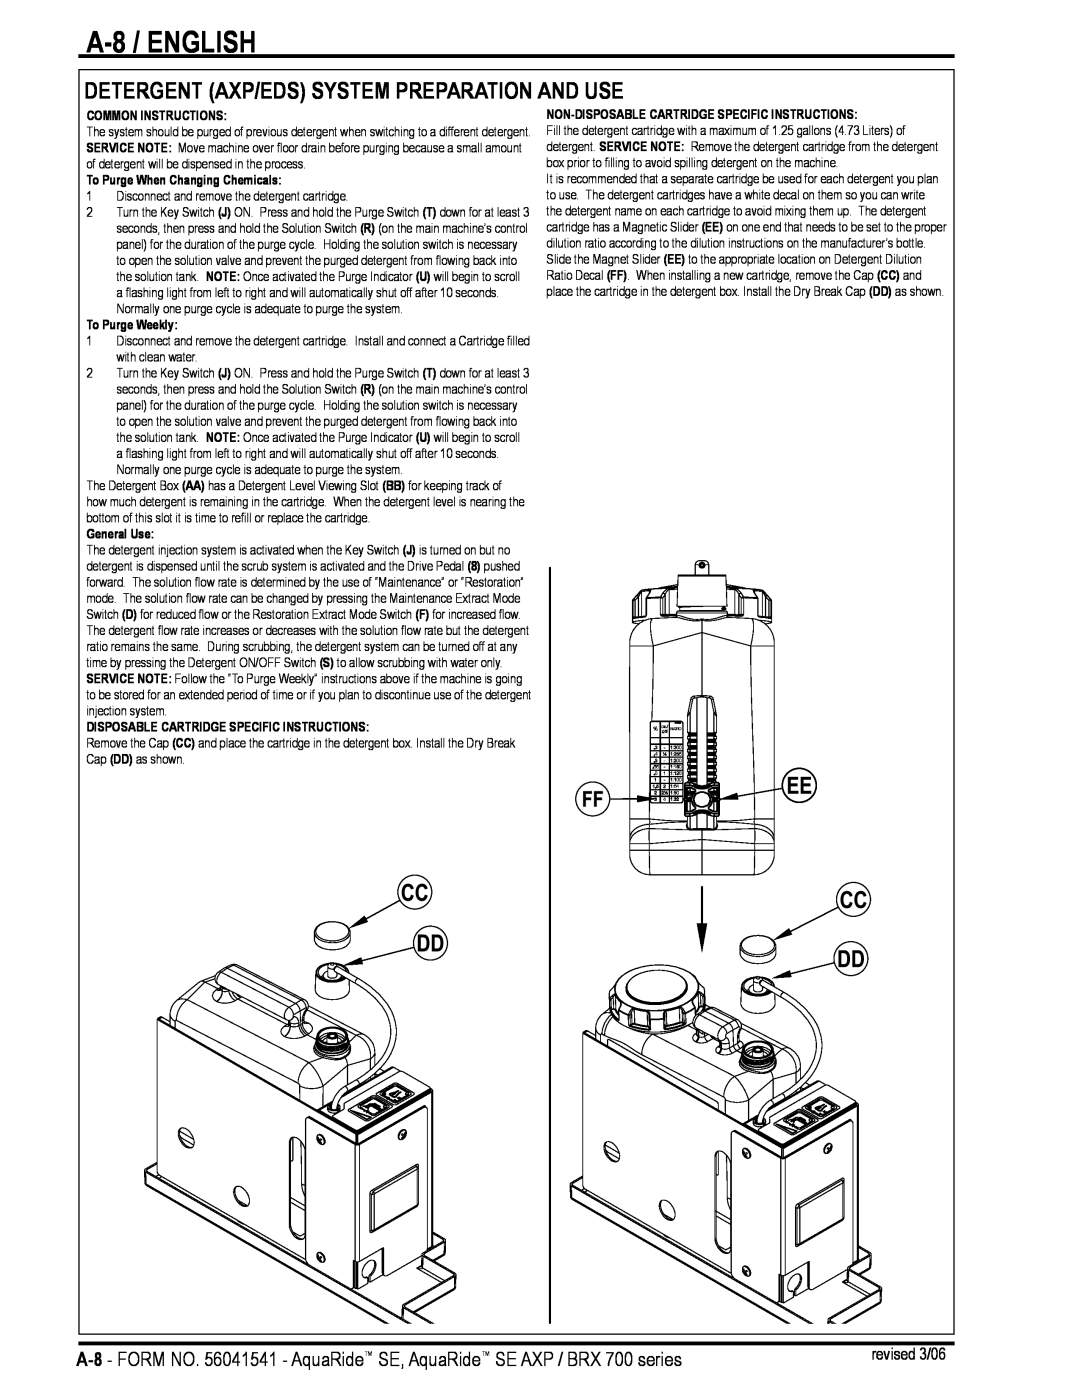 Nilfisk-Advance America BRX 700 Series A-8 / ENGLISH, Detergent Axp/Eds System Preparation And Use, Common Instructions 